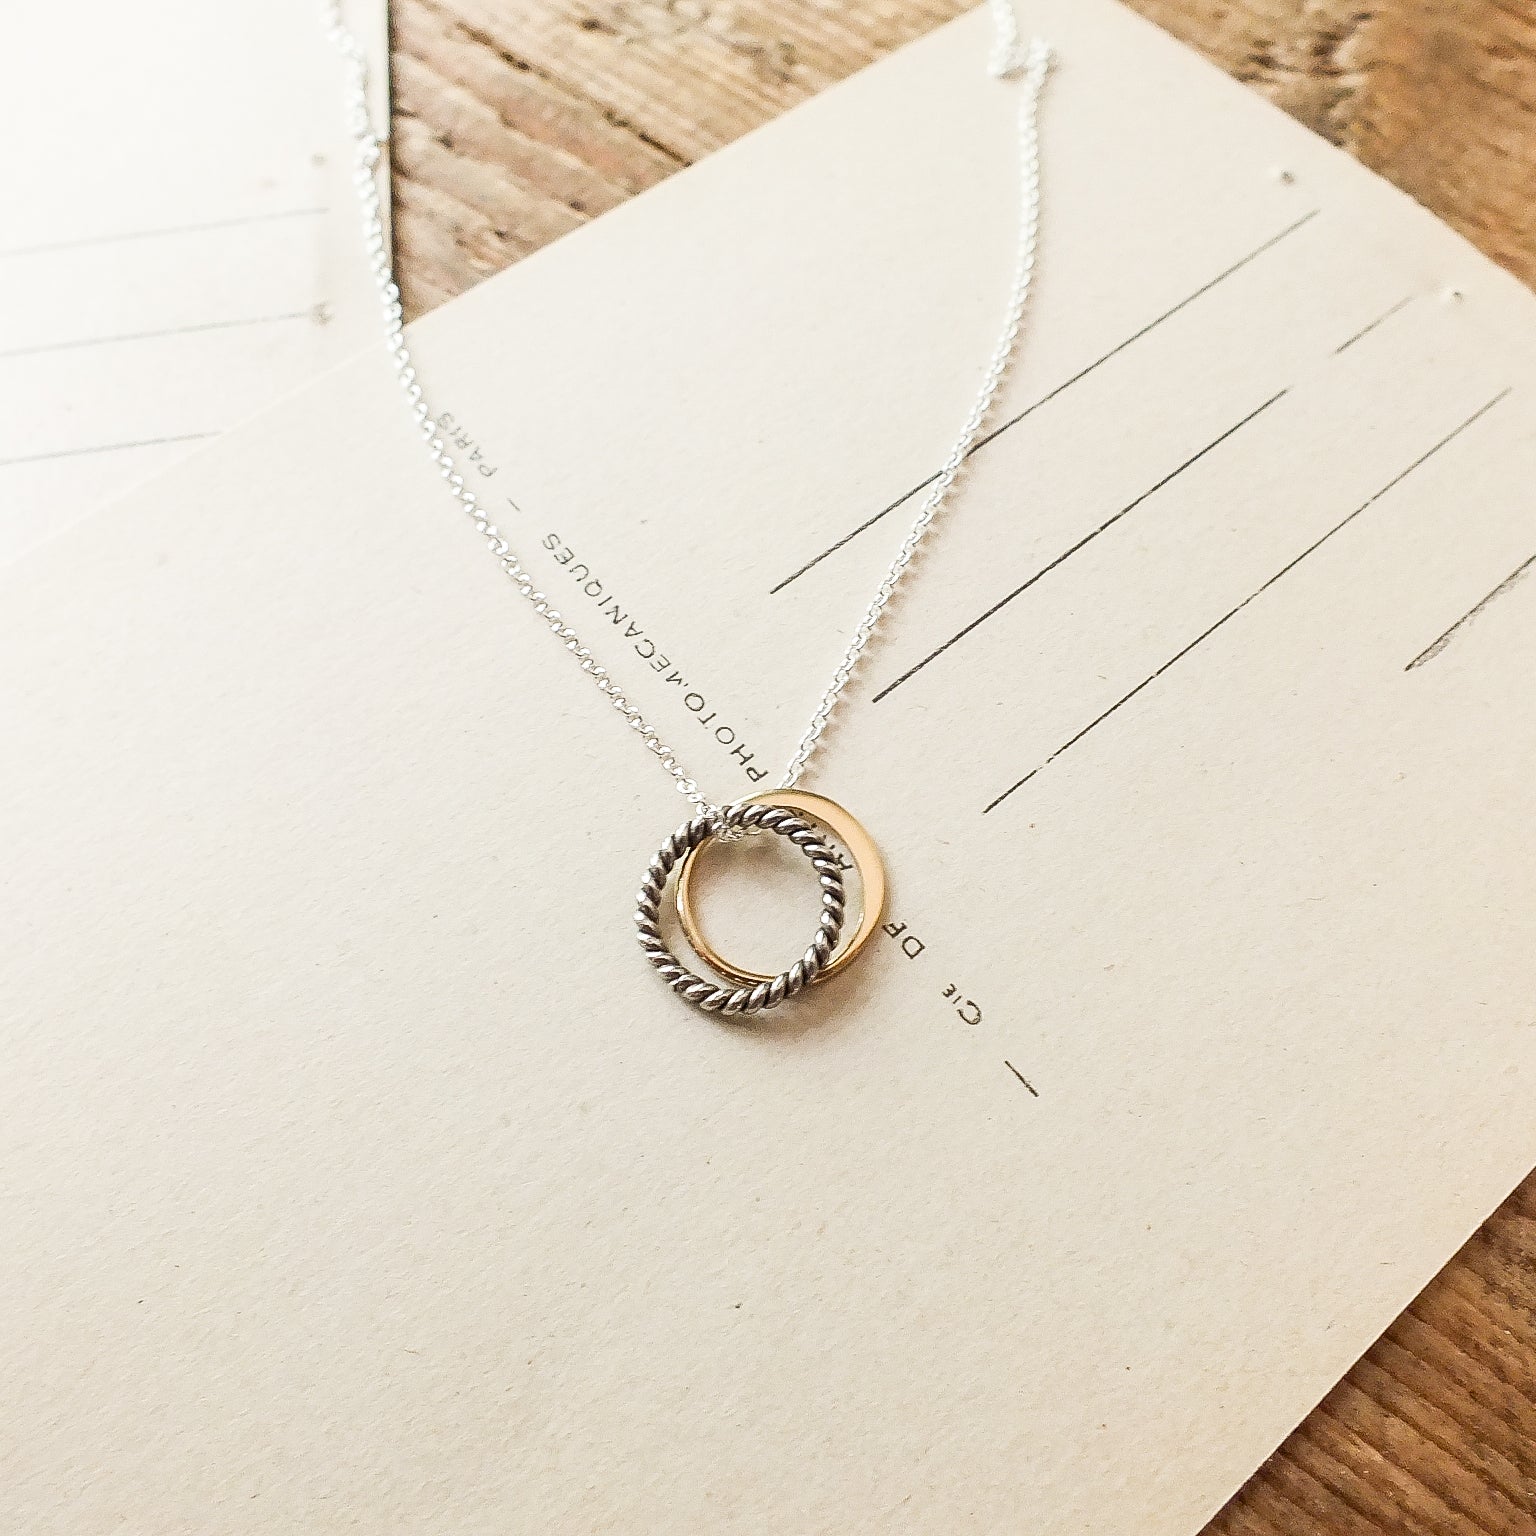 True Friends Necklace from Becoming Jewelry, with a gold vermeil circular pendant displayed on a card.